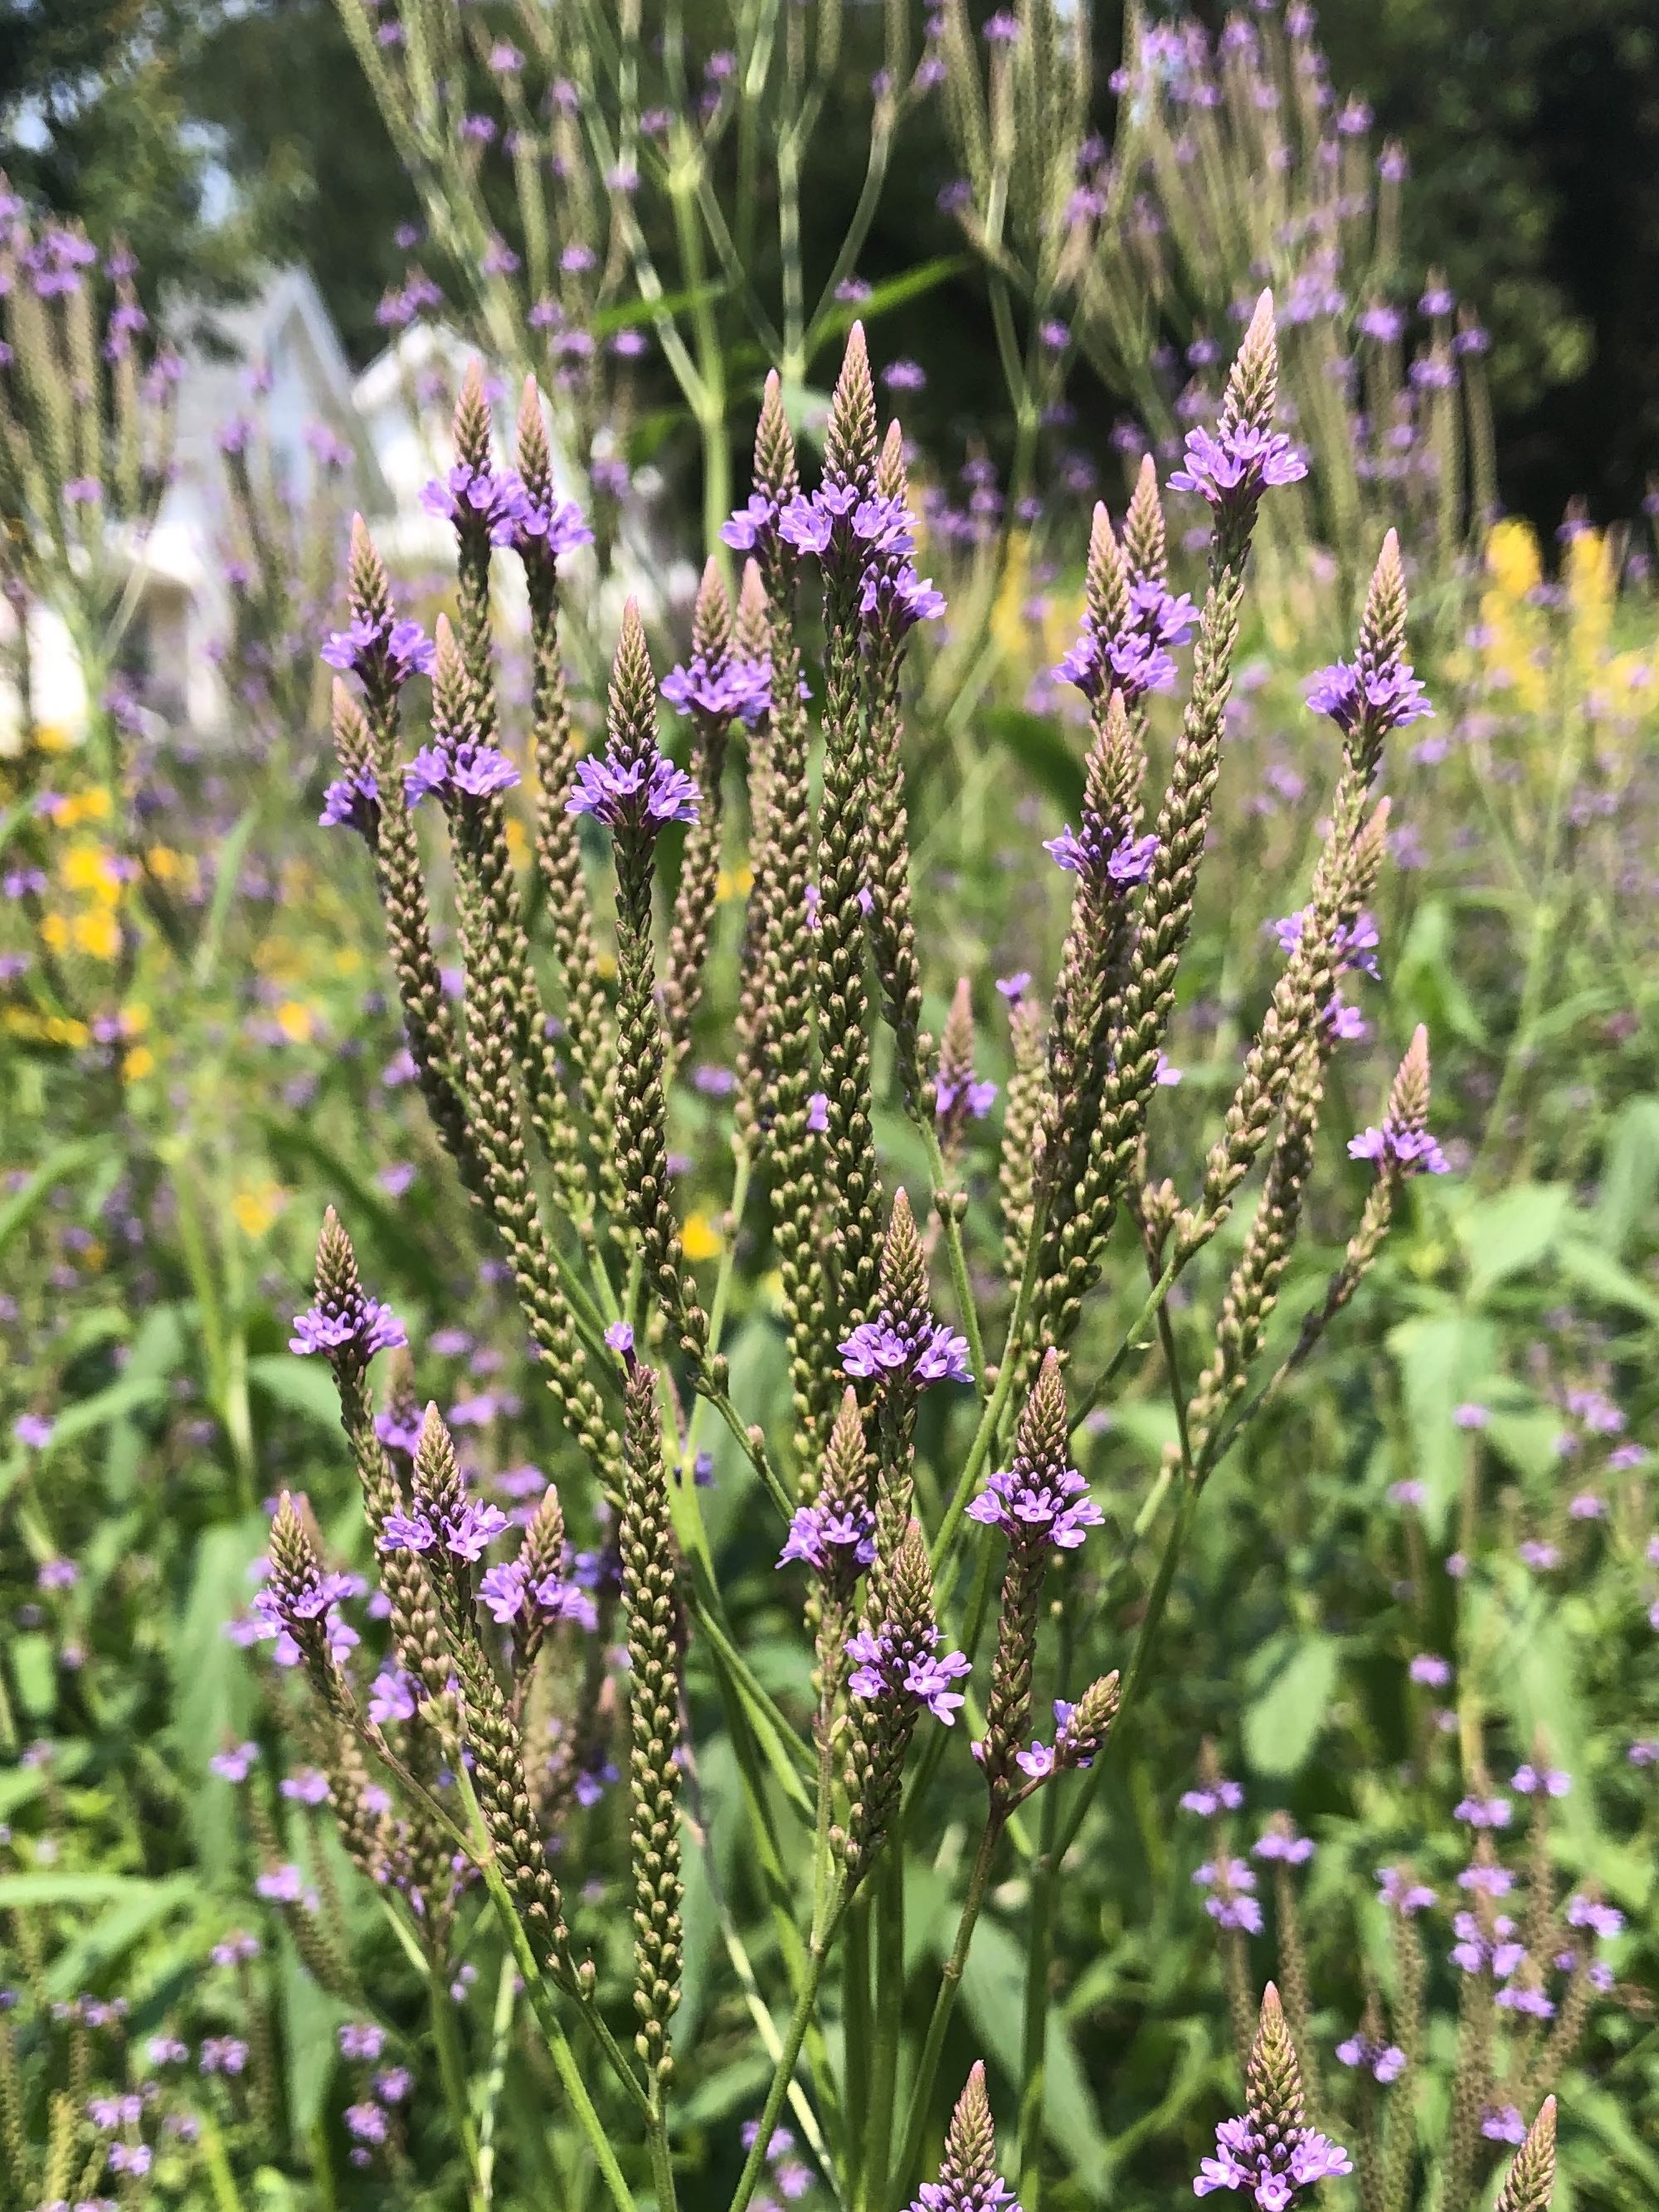 Blue Vervain along Gregory Street Bike Path in Madison, Wisconsin on August, 2021.